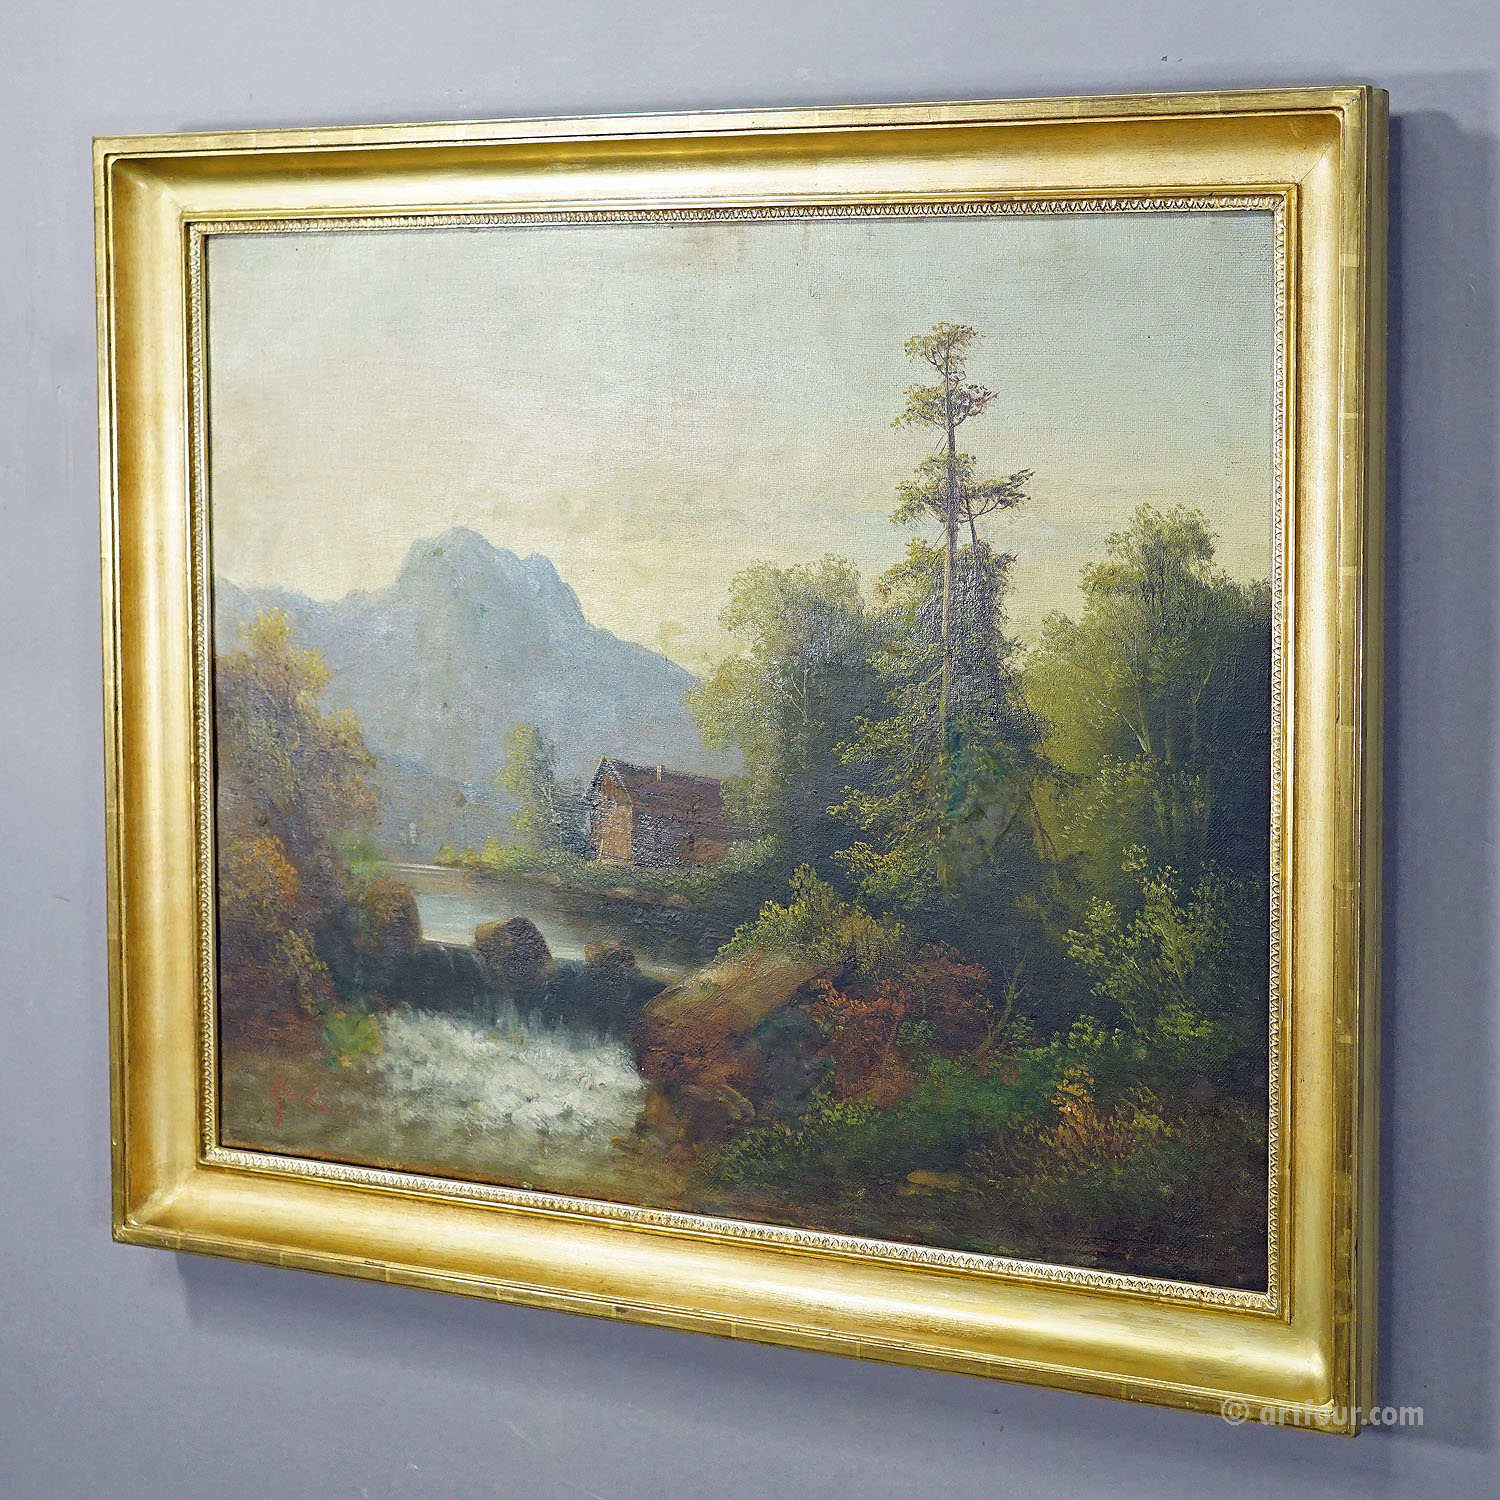 Unknown - Summerly Mountain Landscape with Water Fall and Mountain Hut, 19th century